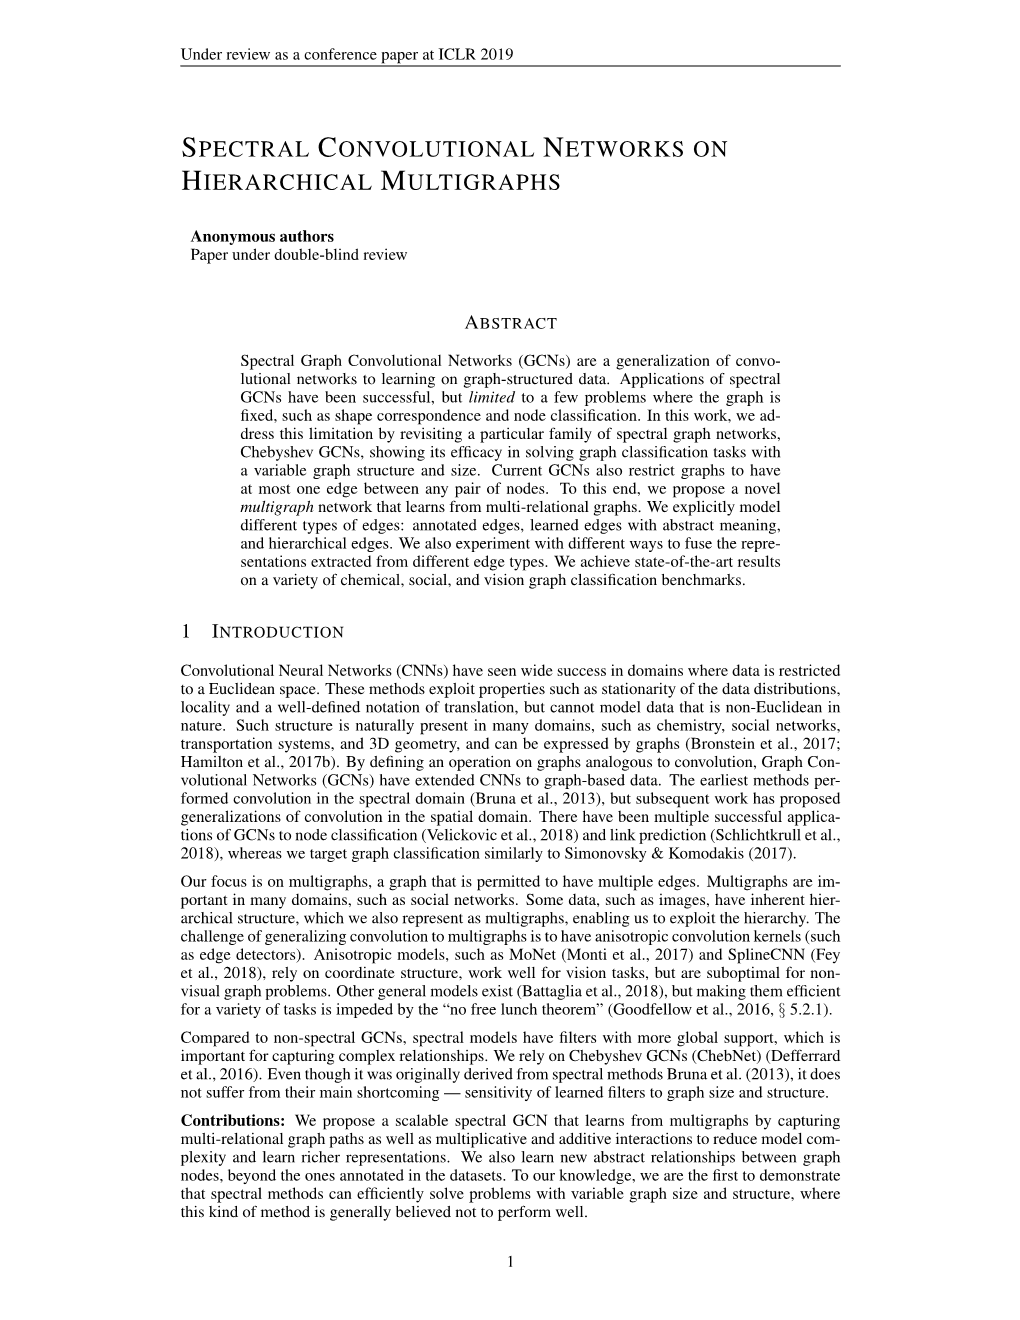 Spectral Convolutional Networks on Hierarchical Multigraphs